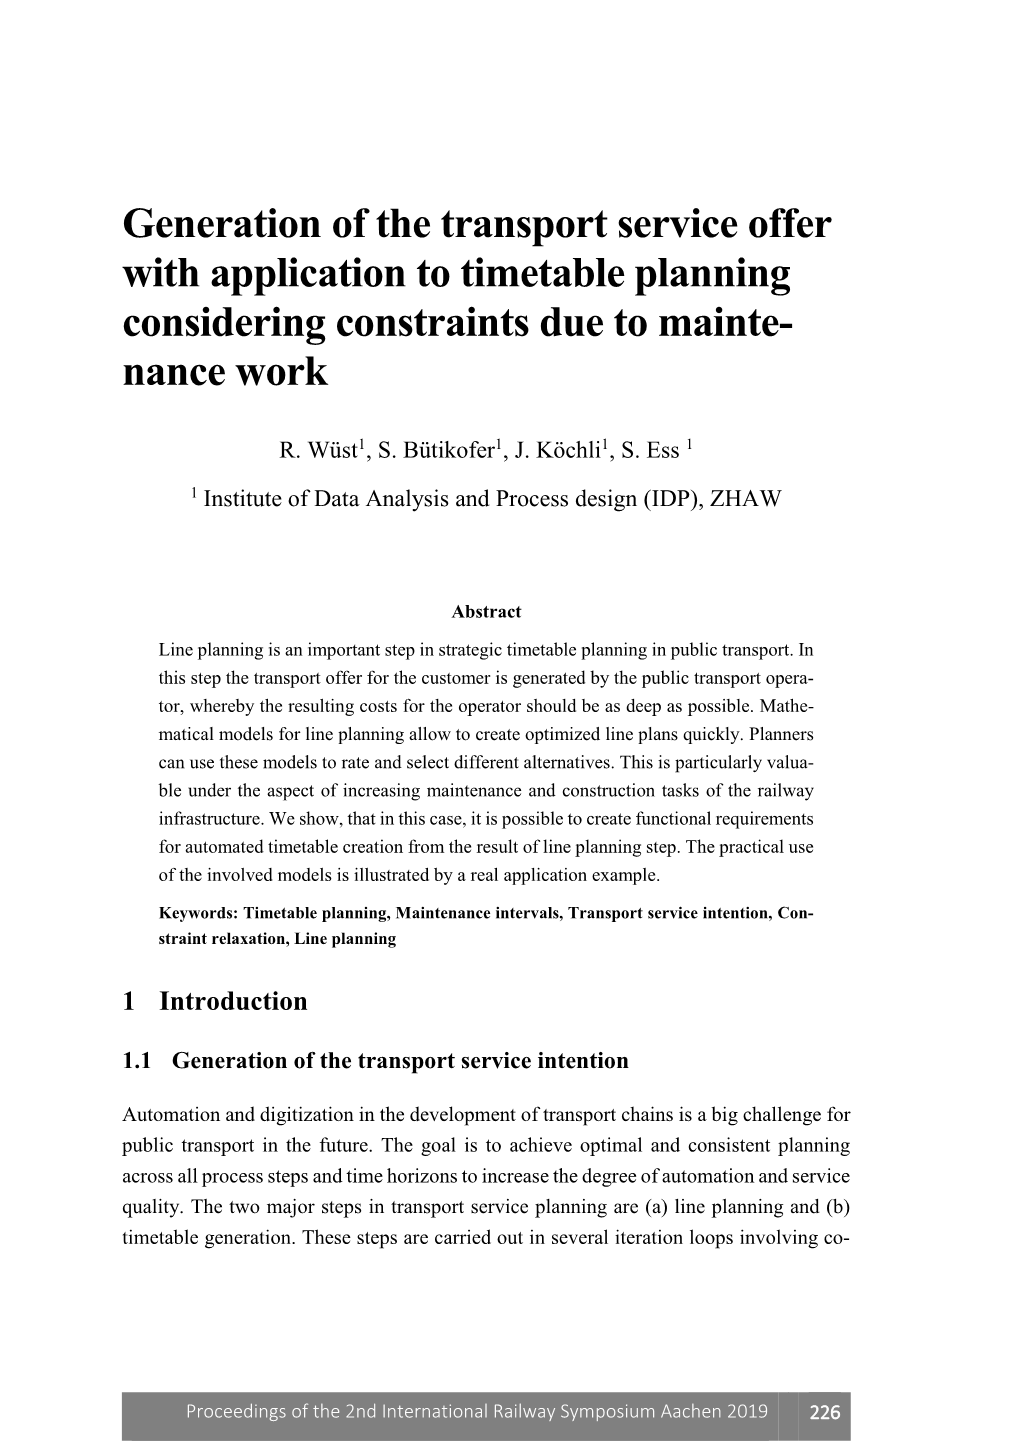 Generation of the Transport Service Offer with Application to Timetable Planning Considering Constraints Due to Mainte- Nance Work